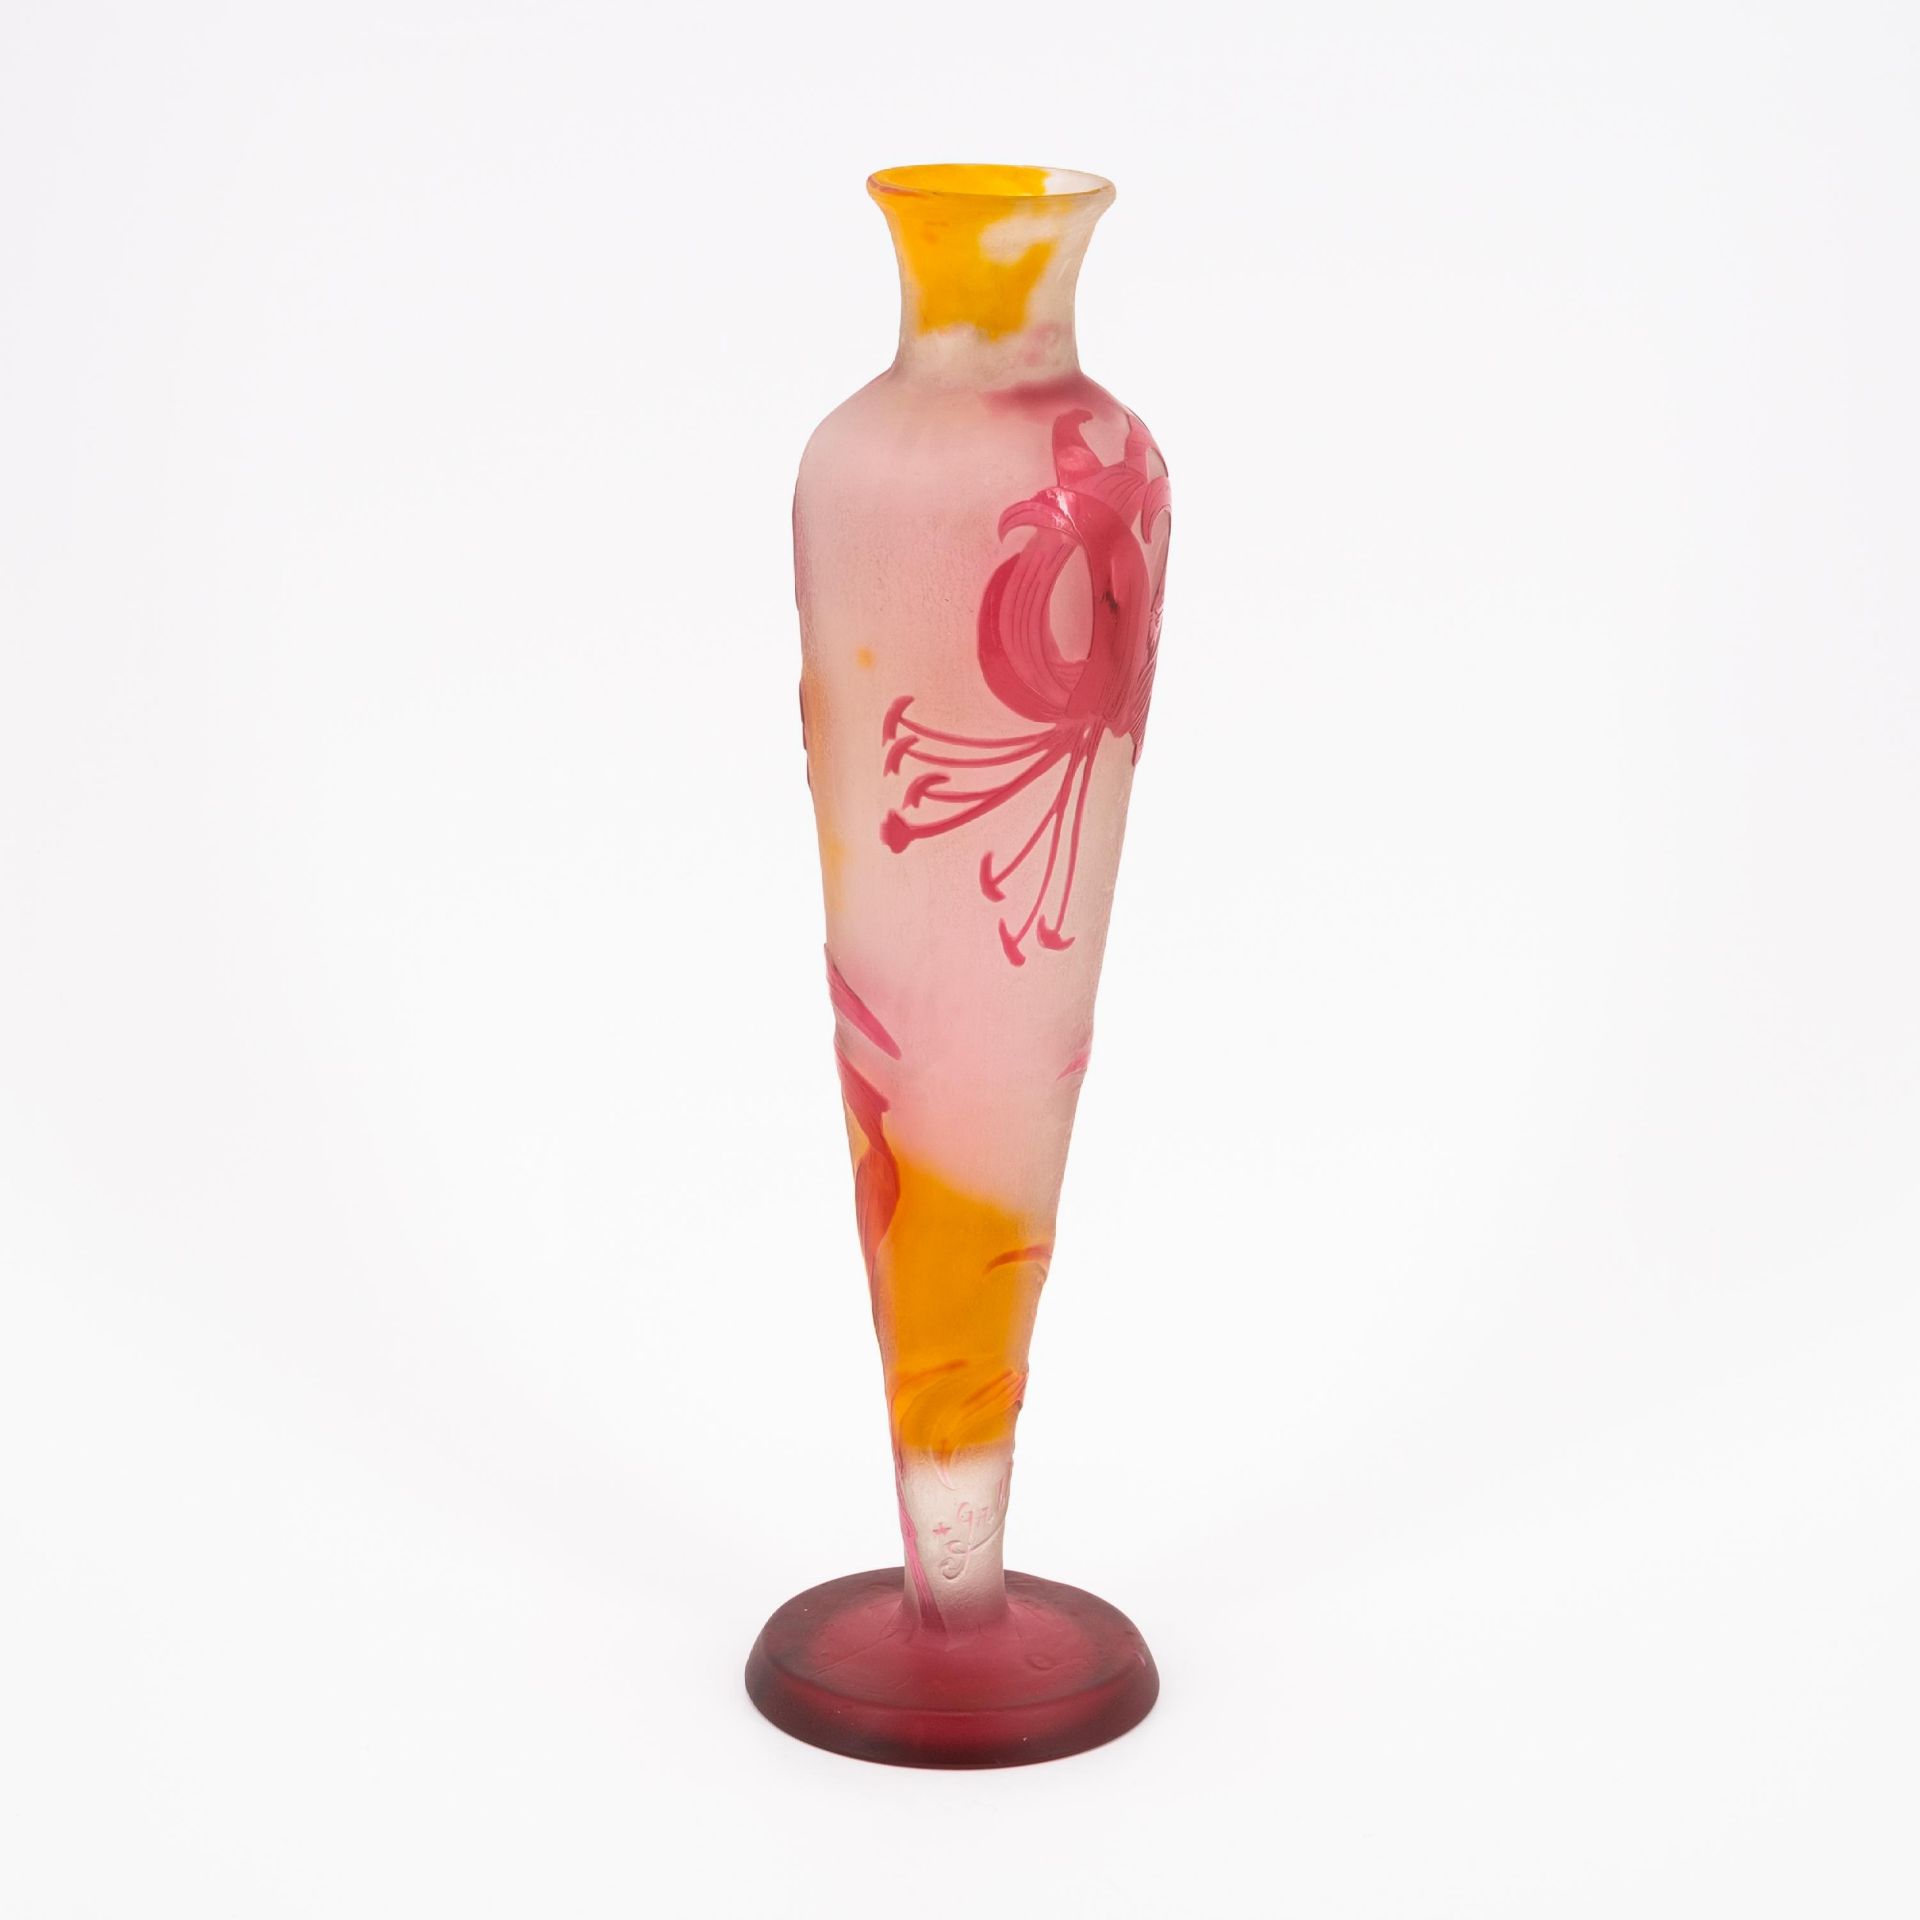 GLASS SOLIFLORE WITH LILY - Image 3 of 7